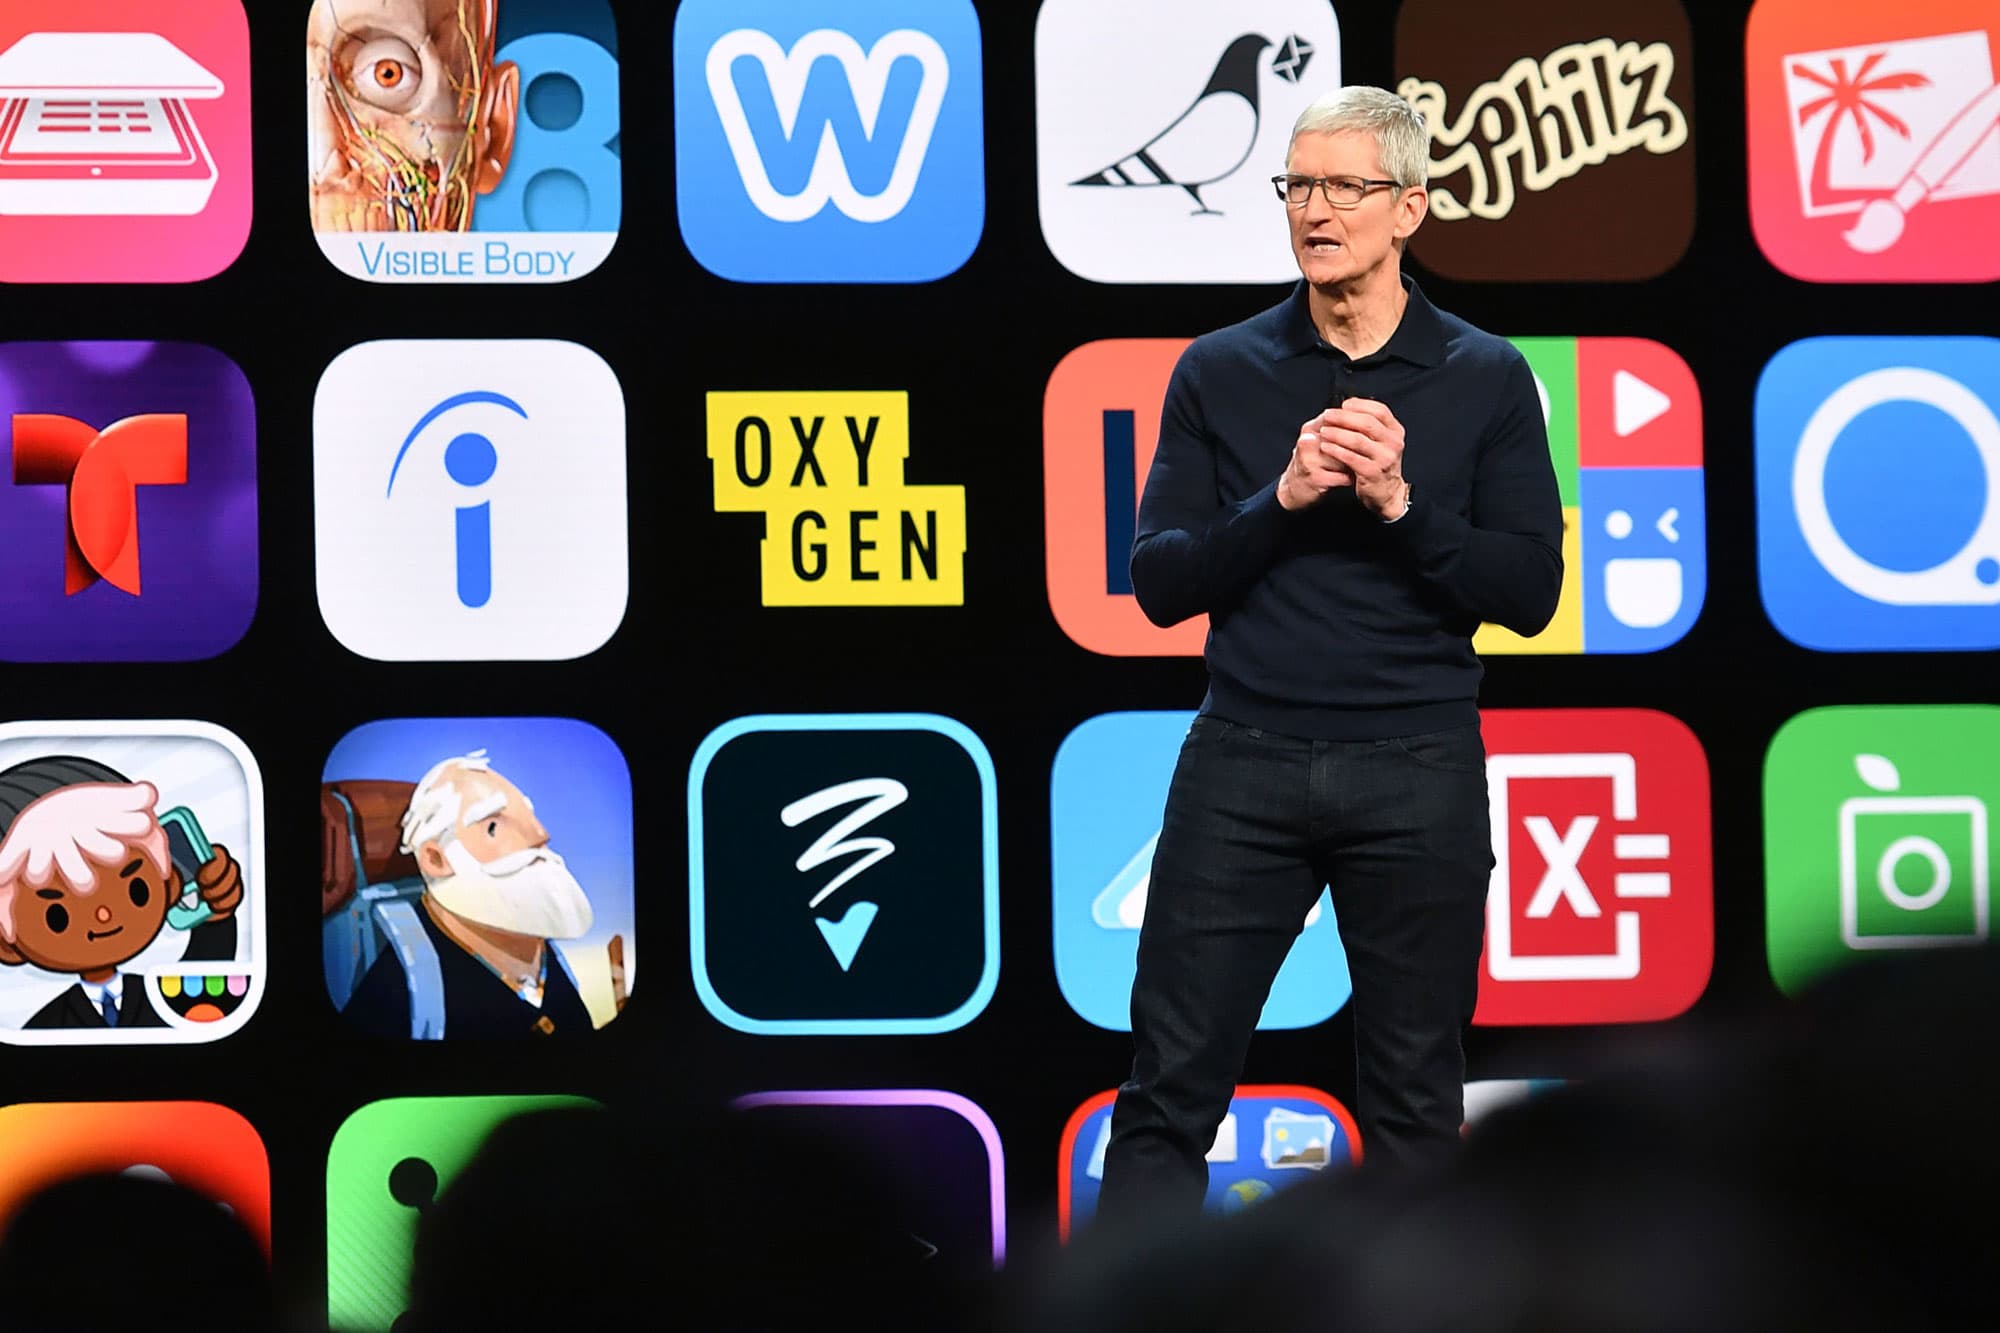 Apple’s App Store had gross sales of about $ 64 billion in 2020